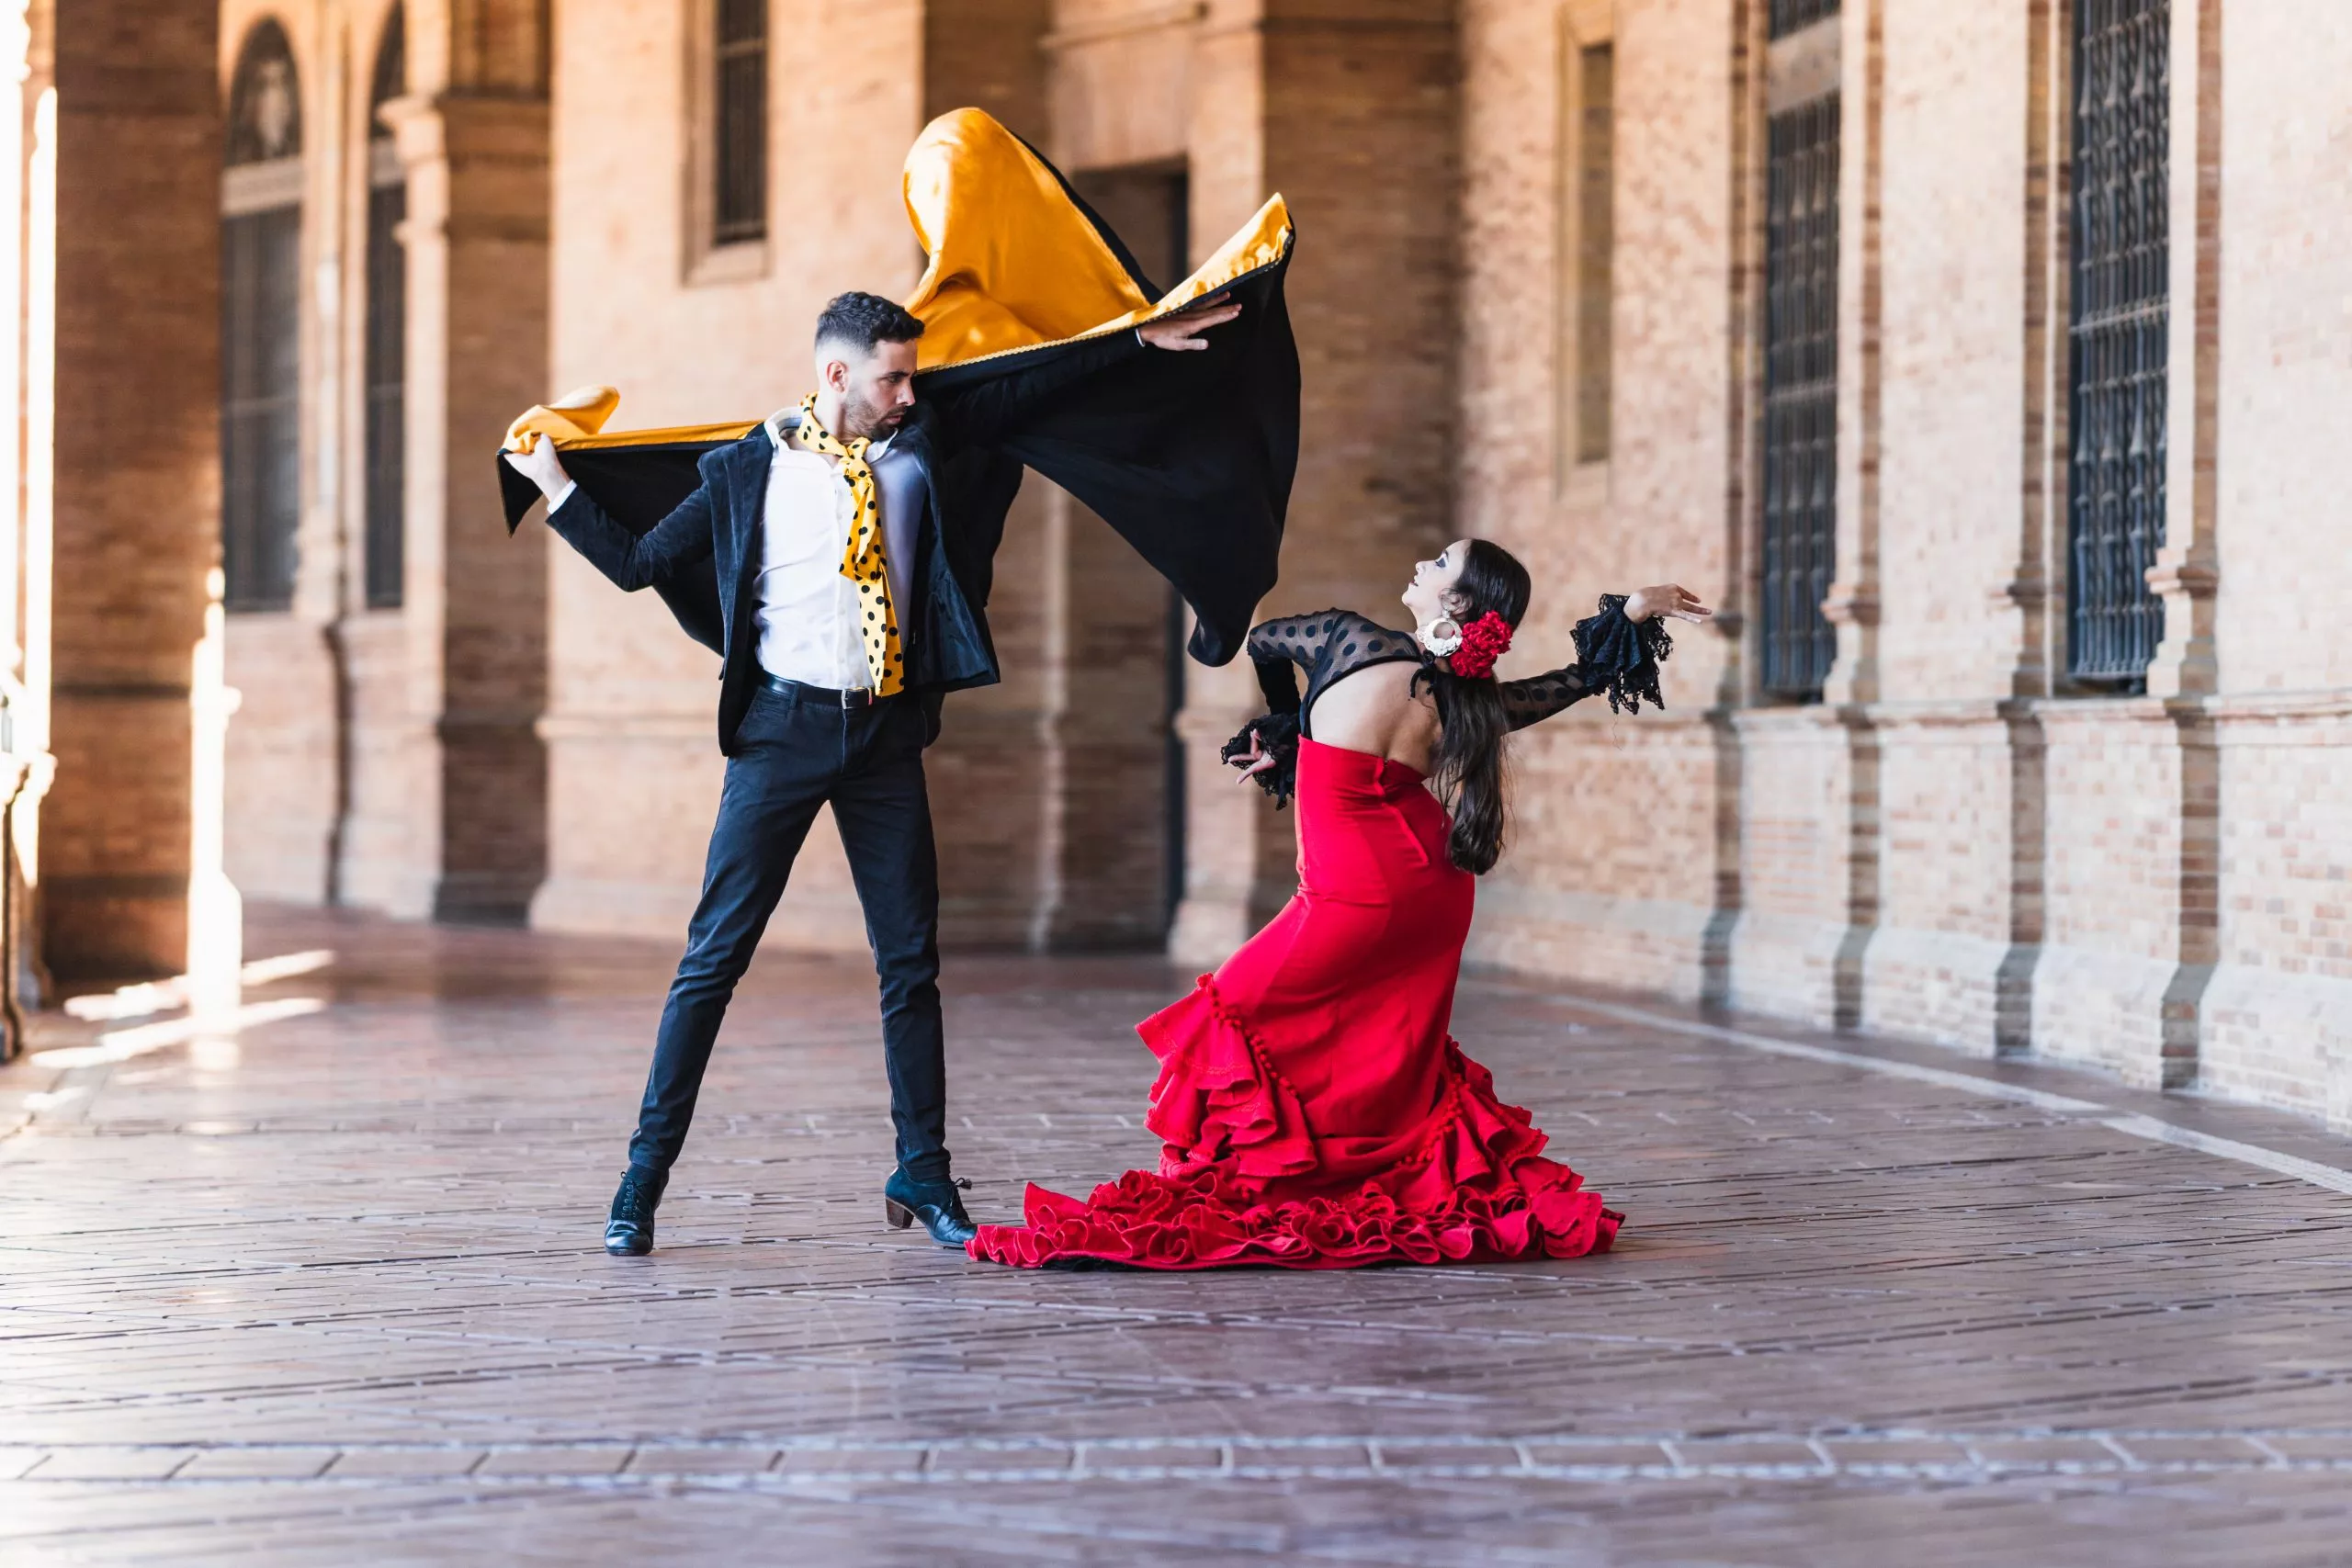 Man and woman in flamenco costume performing a dance on the shadow of the Spain Square in Seville